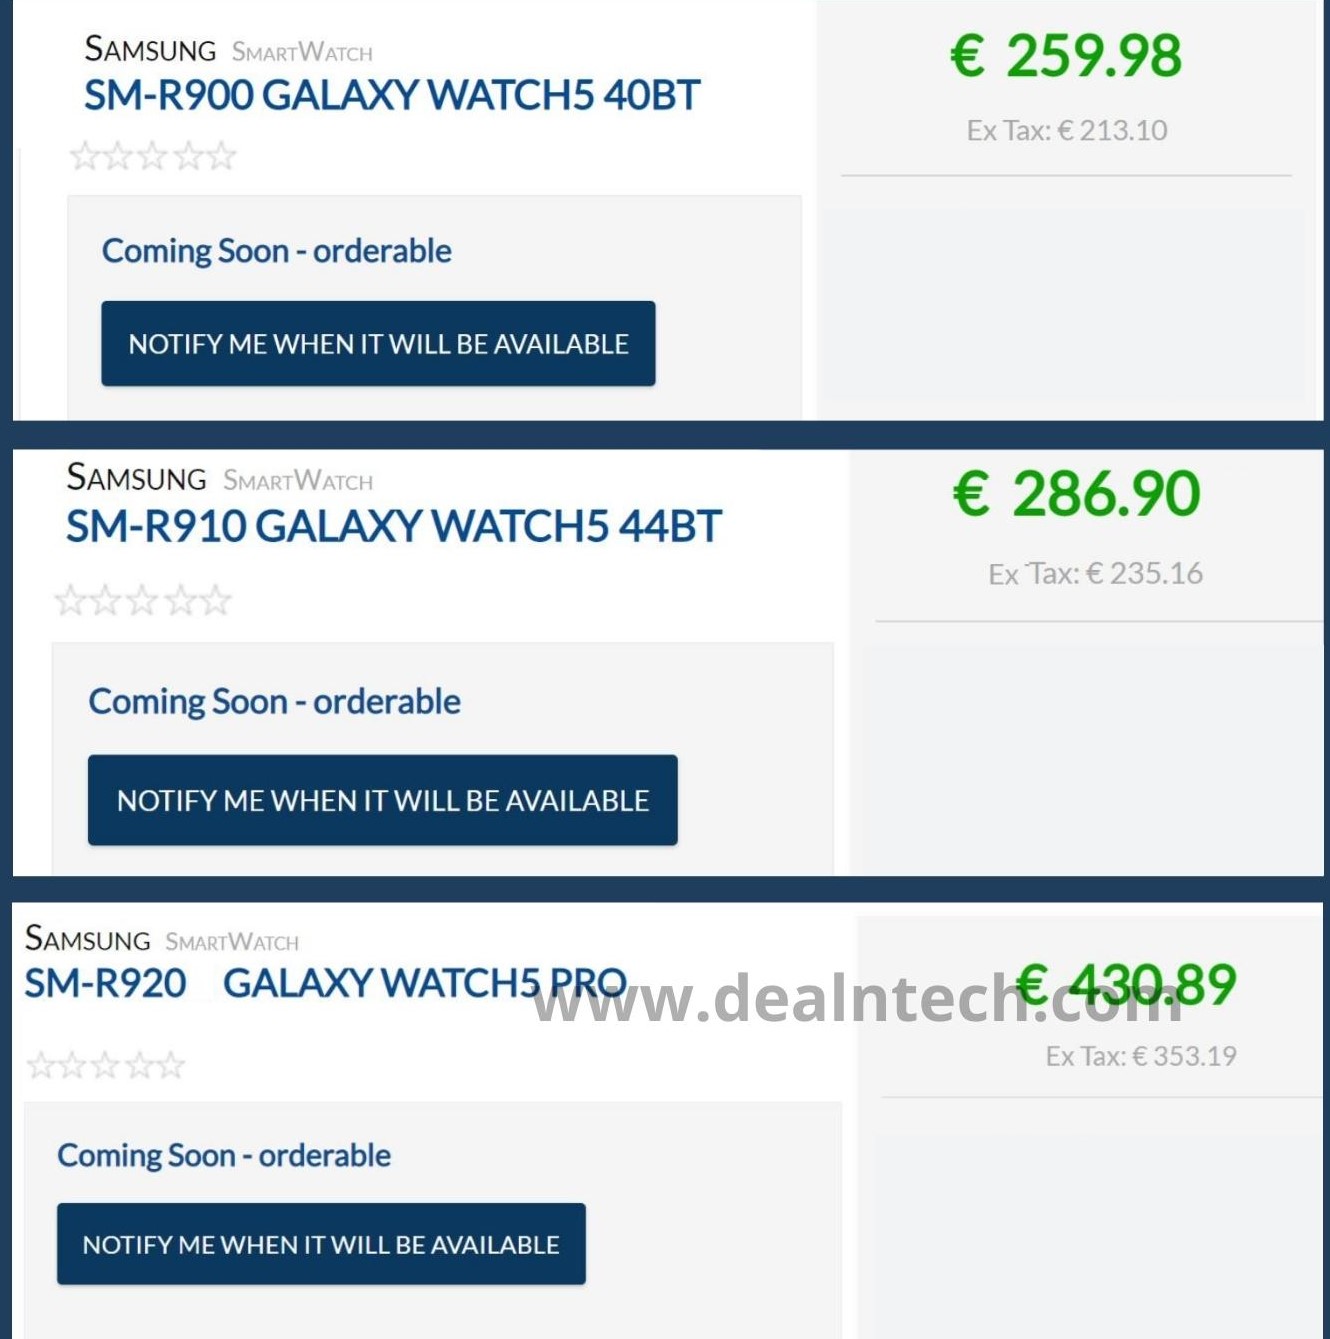 Samsung Galaxy Watch 5 and Watch 5 Pro Pricing Details